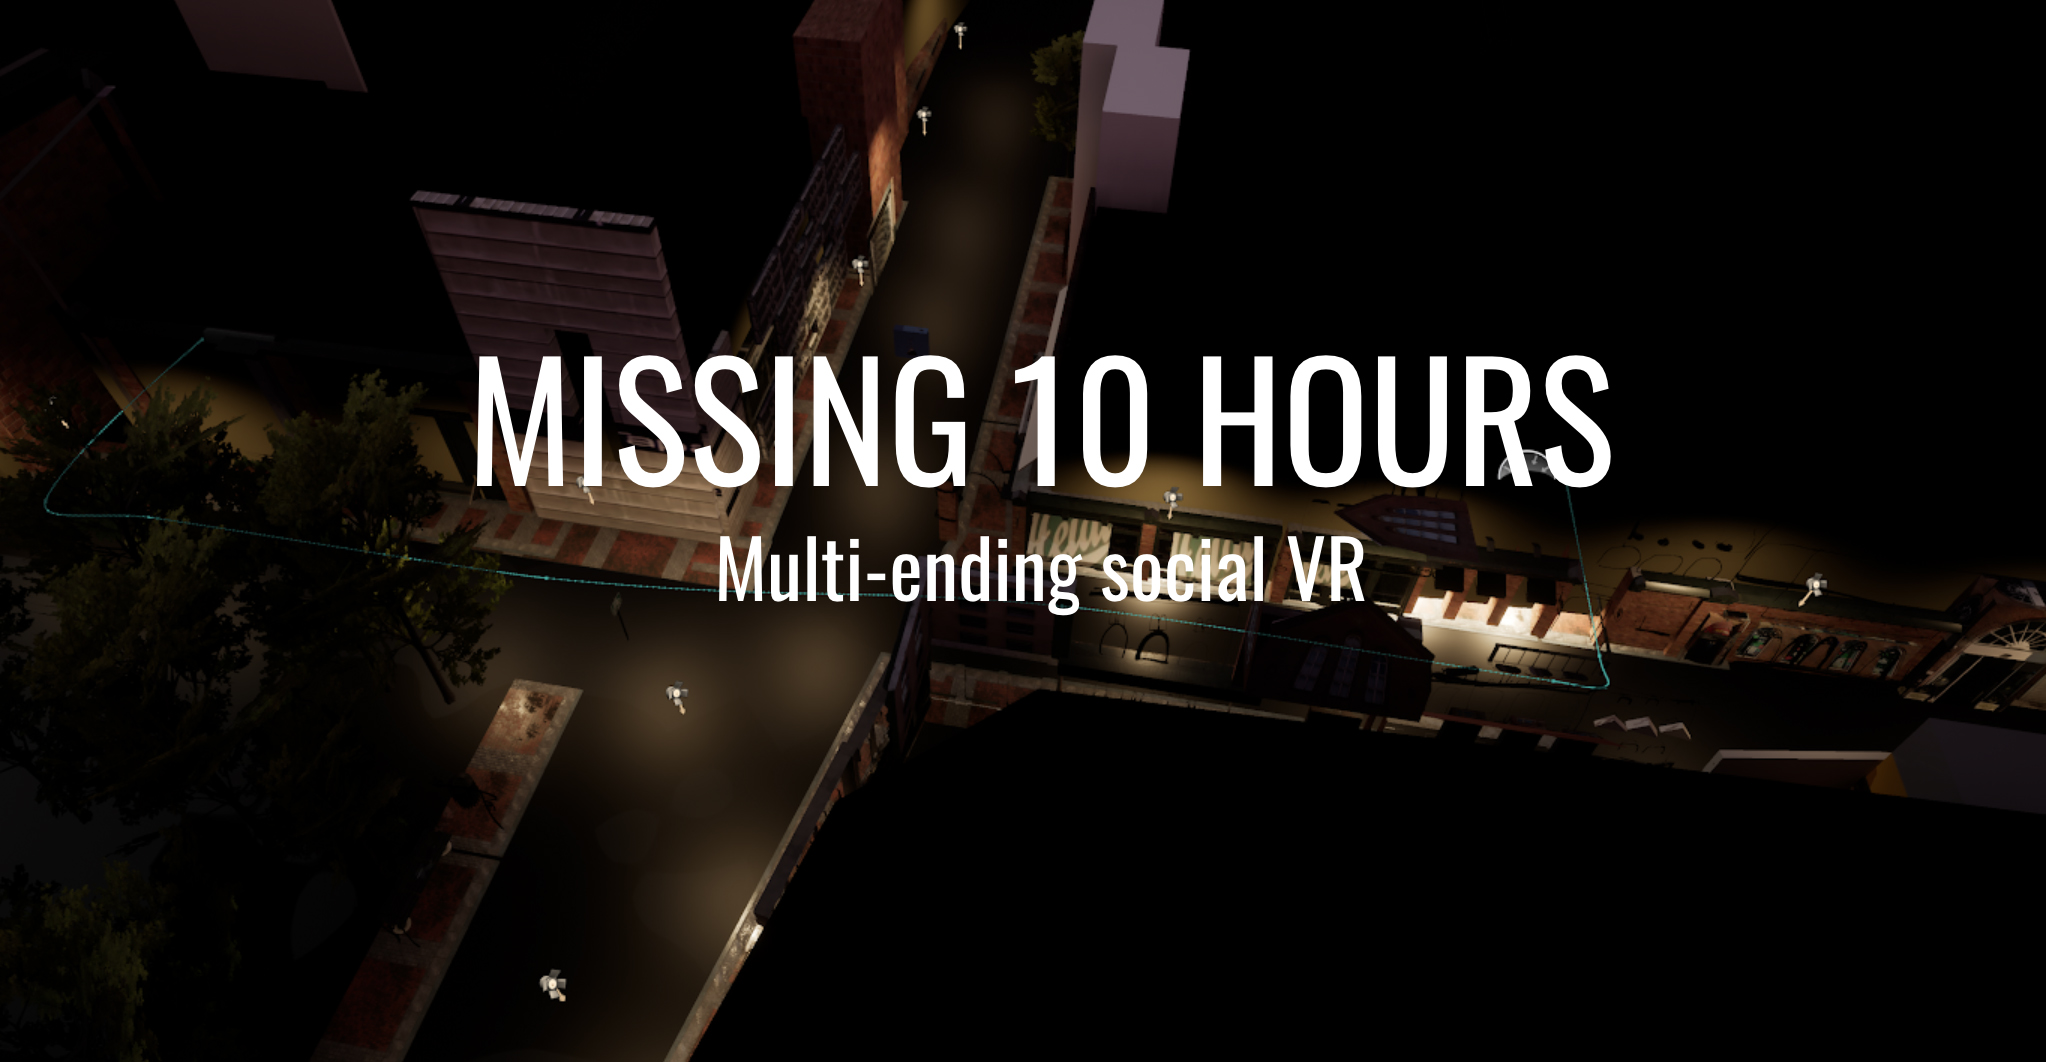 Missing 10 Hours is a social VR experience that exposes realities that many are familiar with but not many talk about.